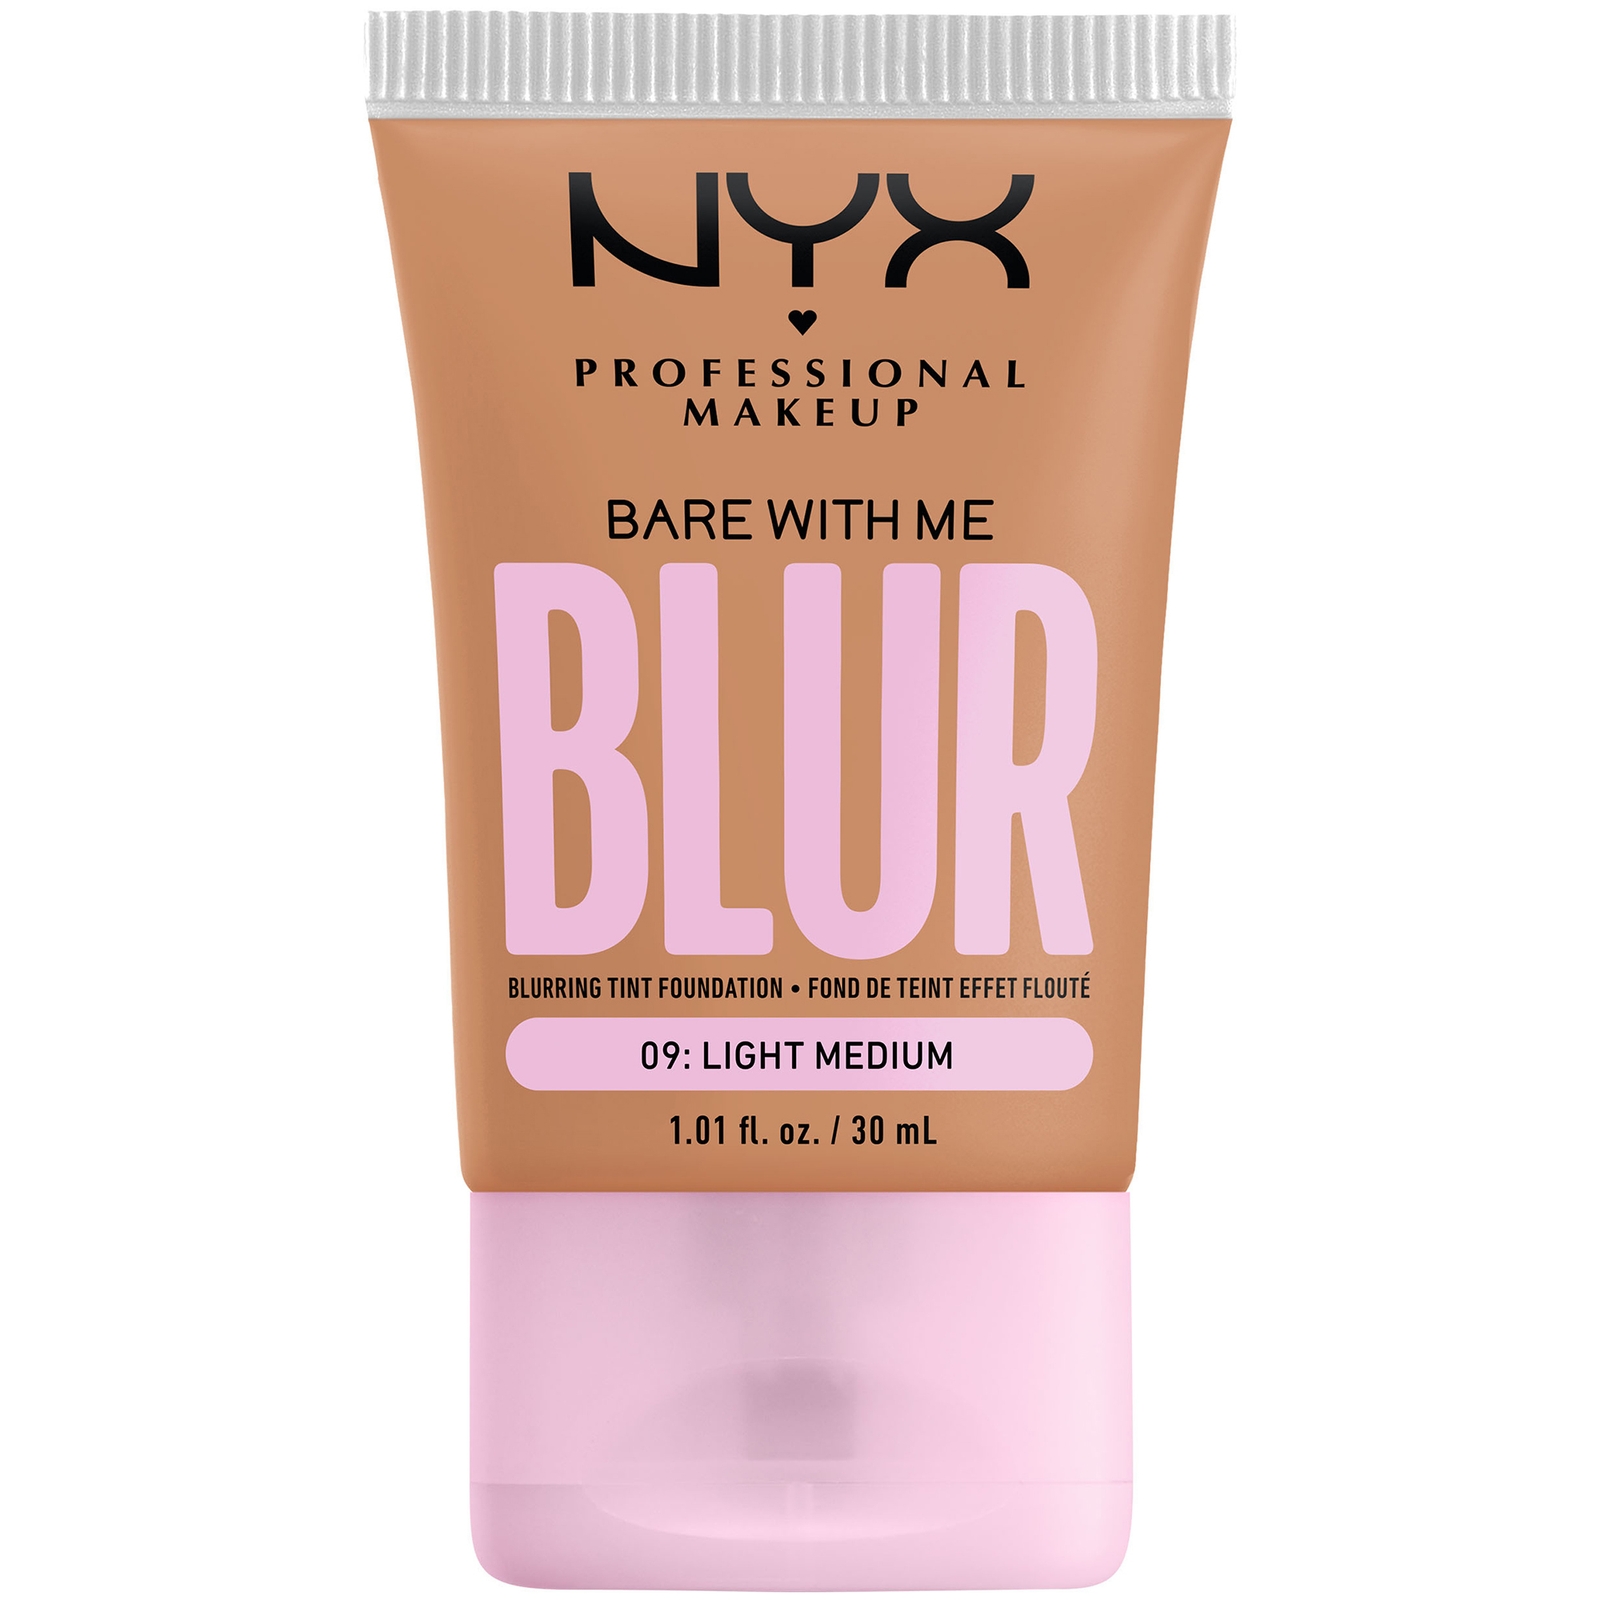 Nyx Professional Makeup Bare With Me Blur Tint Foundation 30ml (varios Shades) - Light Medium In White